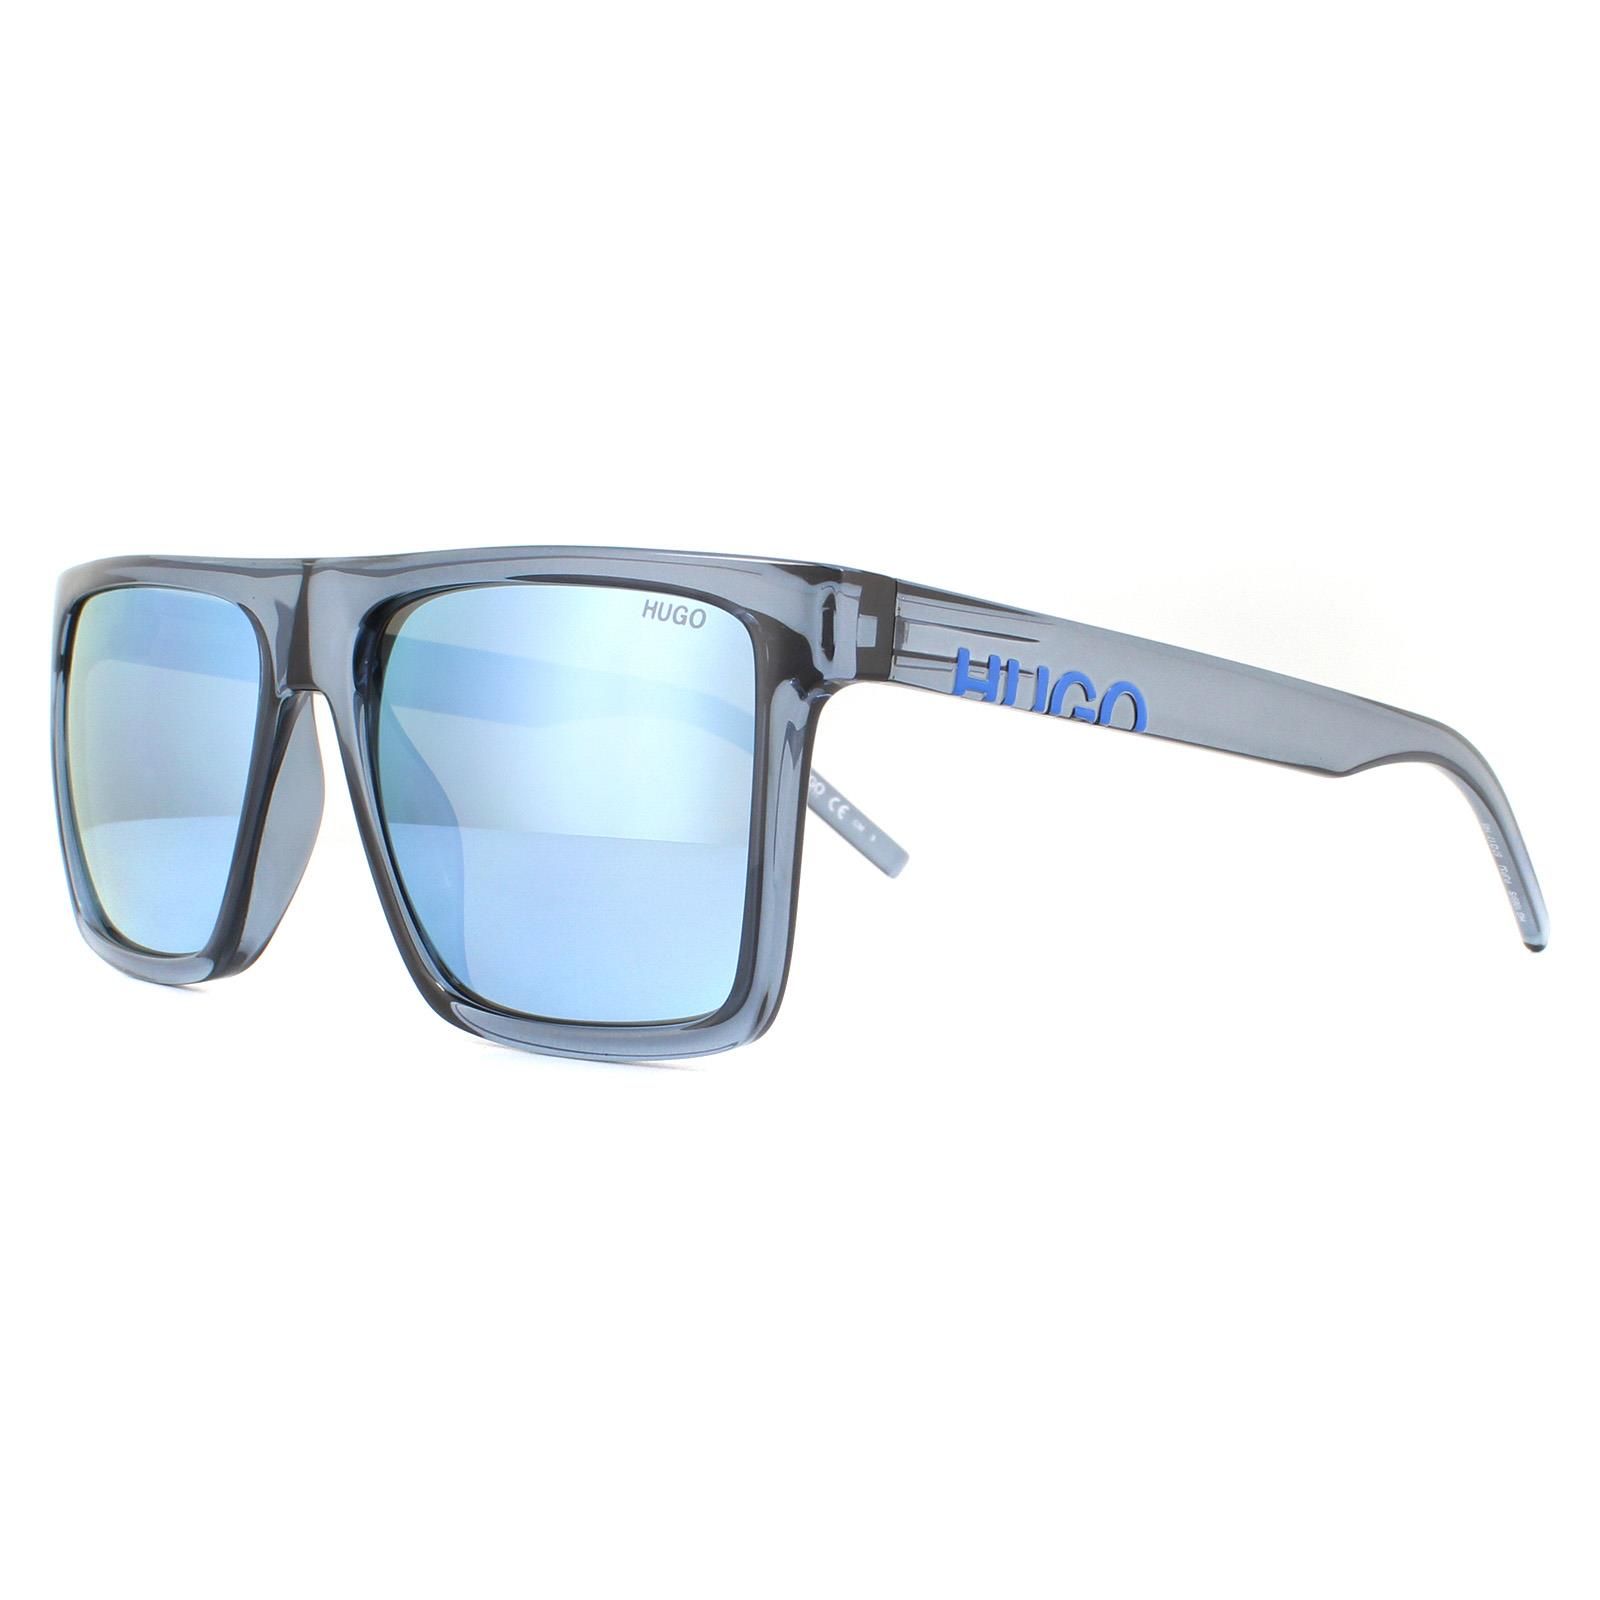 Hugo by Hugo Boss Sunglasses HG 1069/S PJP 3J Crystal Blue Blue Mirror are a large square design made from lightweight acetate. The flat frame top creates a contemporary feel and the temples feature the Hugo logo.